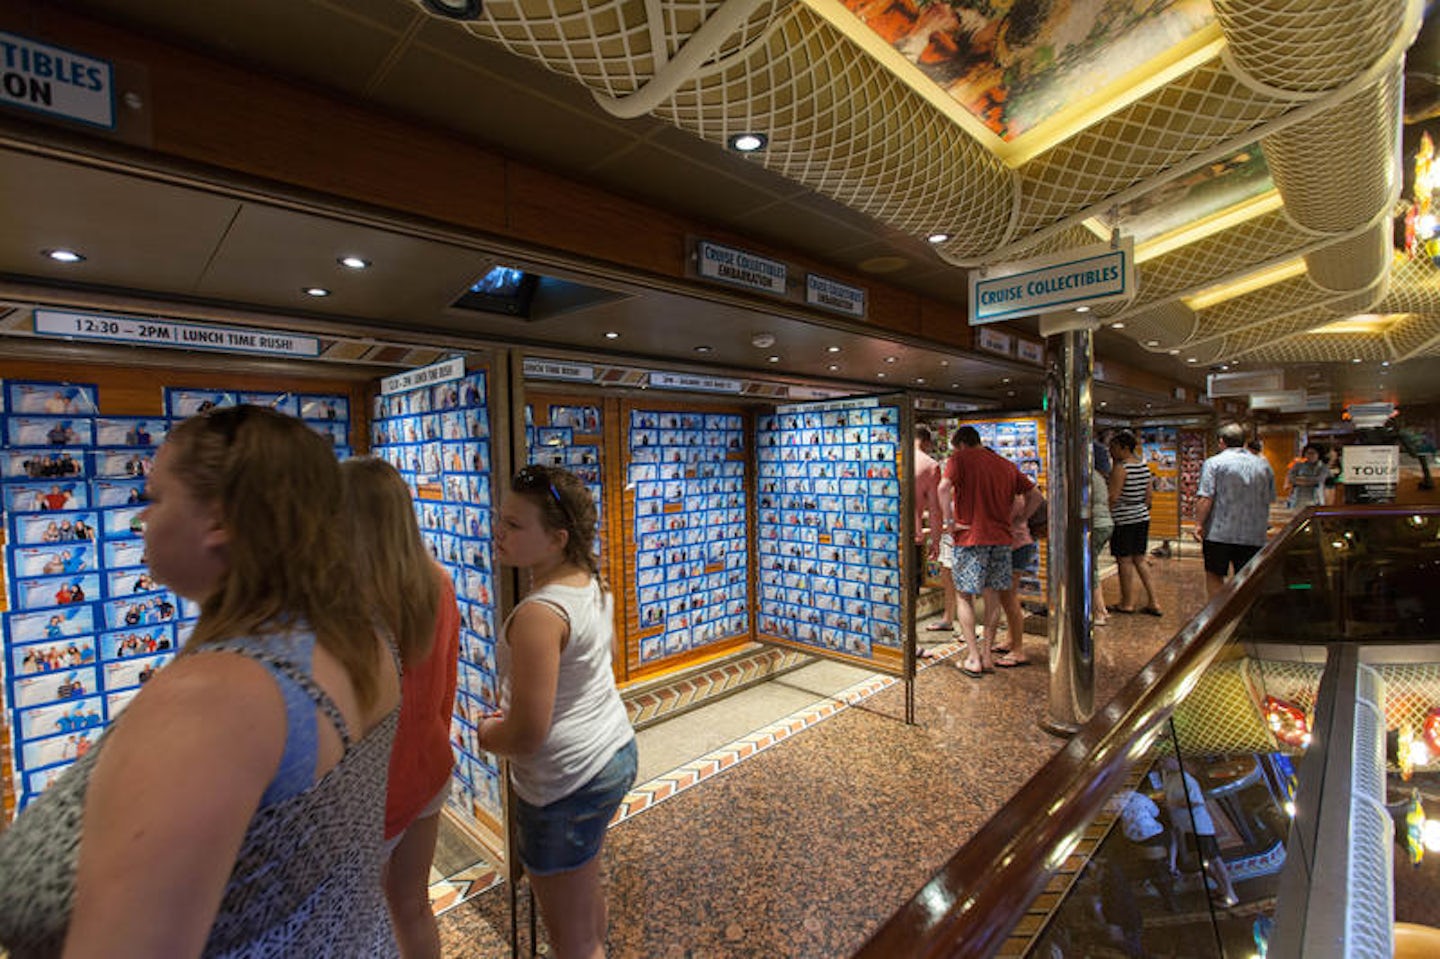 Photo and Video Gallery on Carnival Conquest